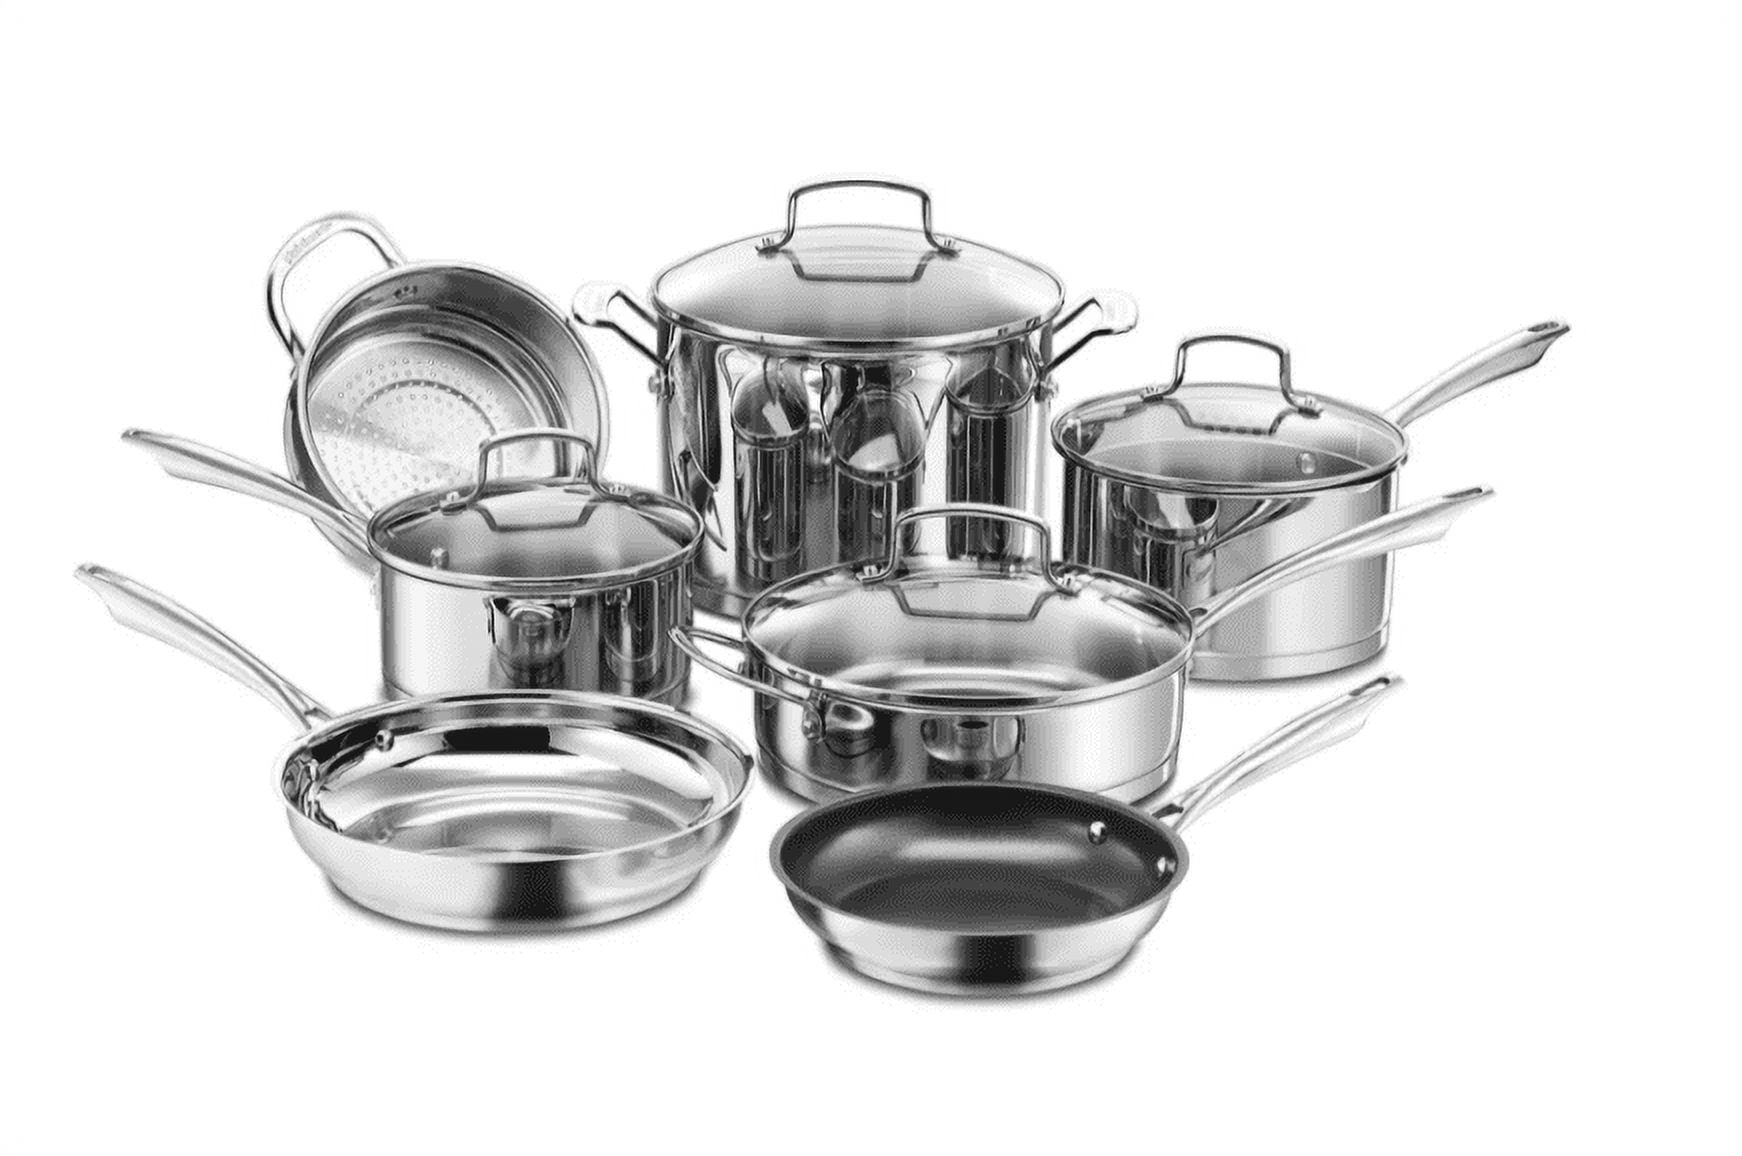 Cuisinart Chef's Classic 11-Piece Stainless Steel Cookware Set 77-11G - The  Home Depot